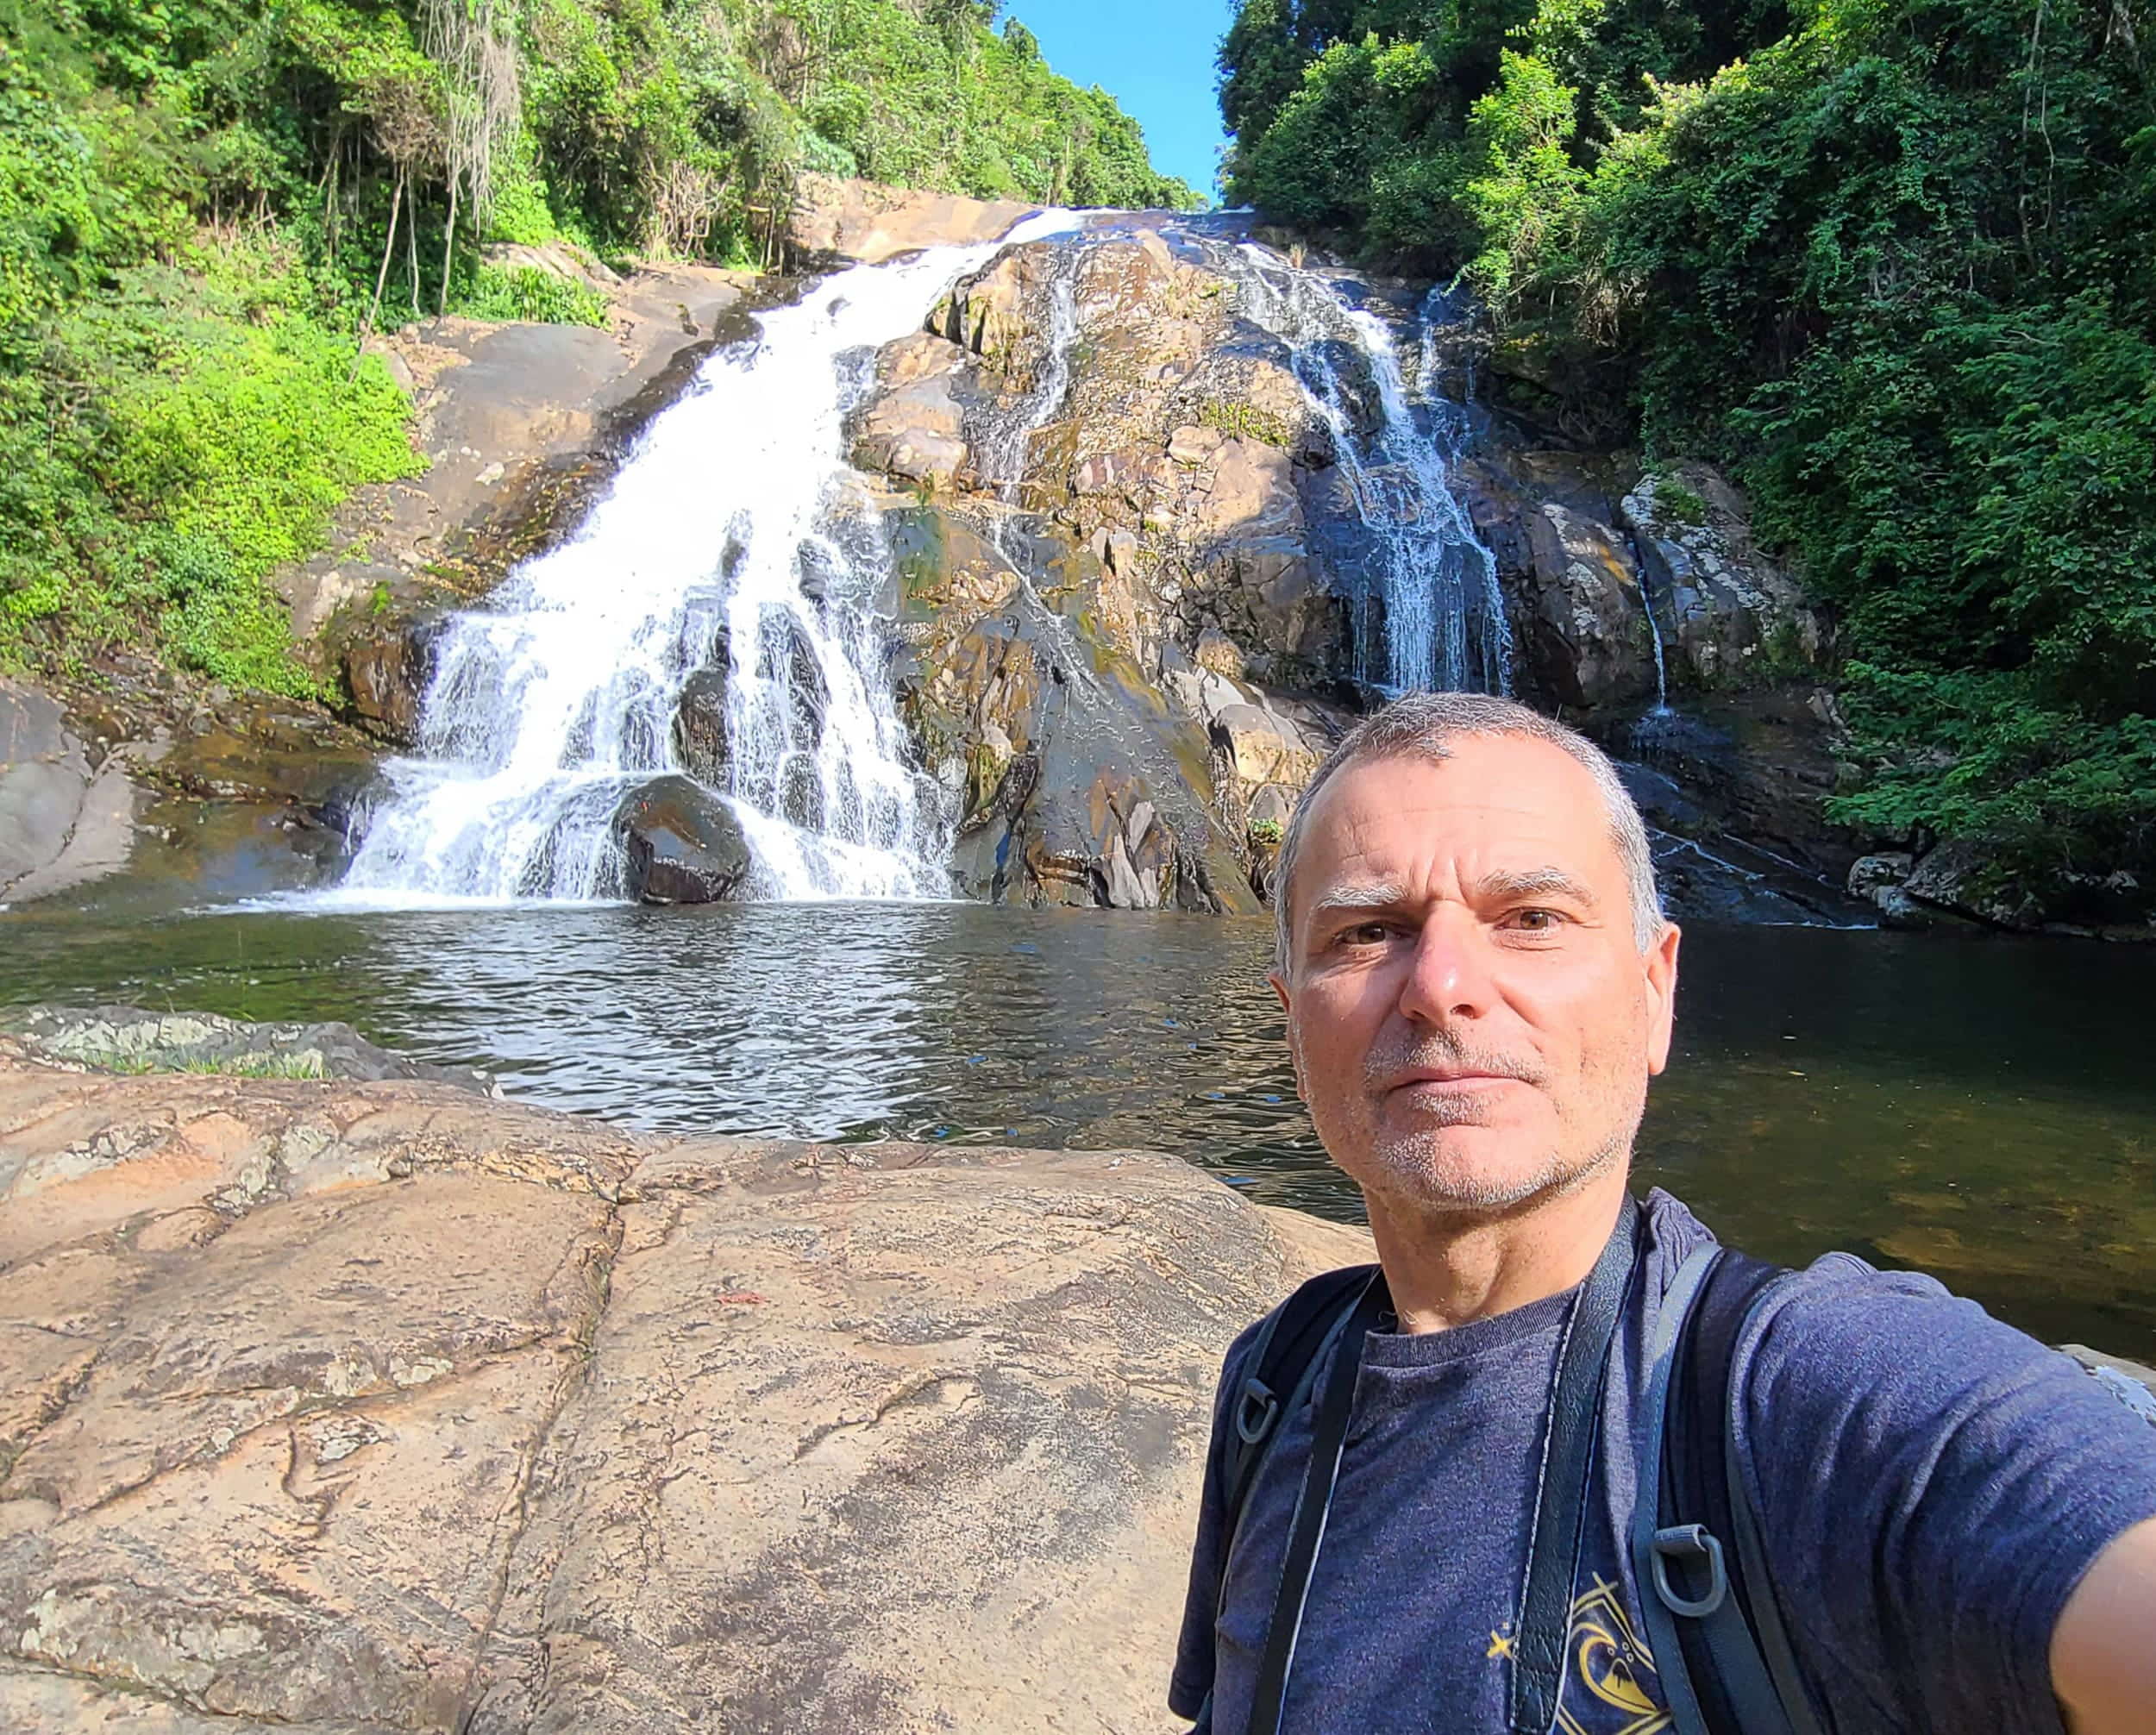 Selfie in front of a waterfall